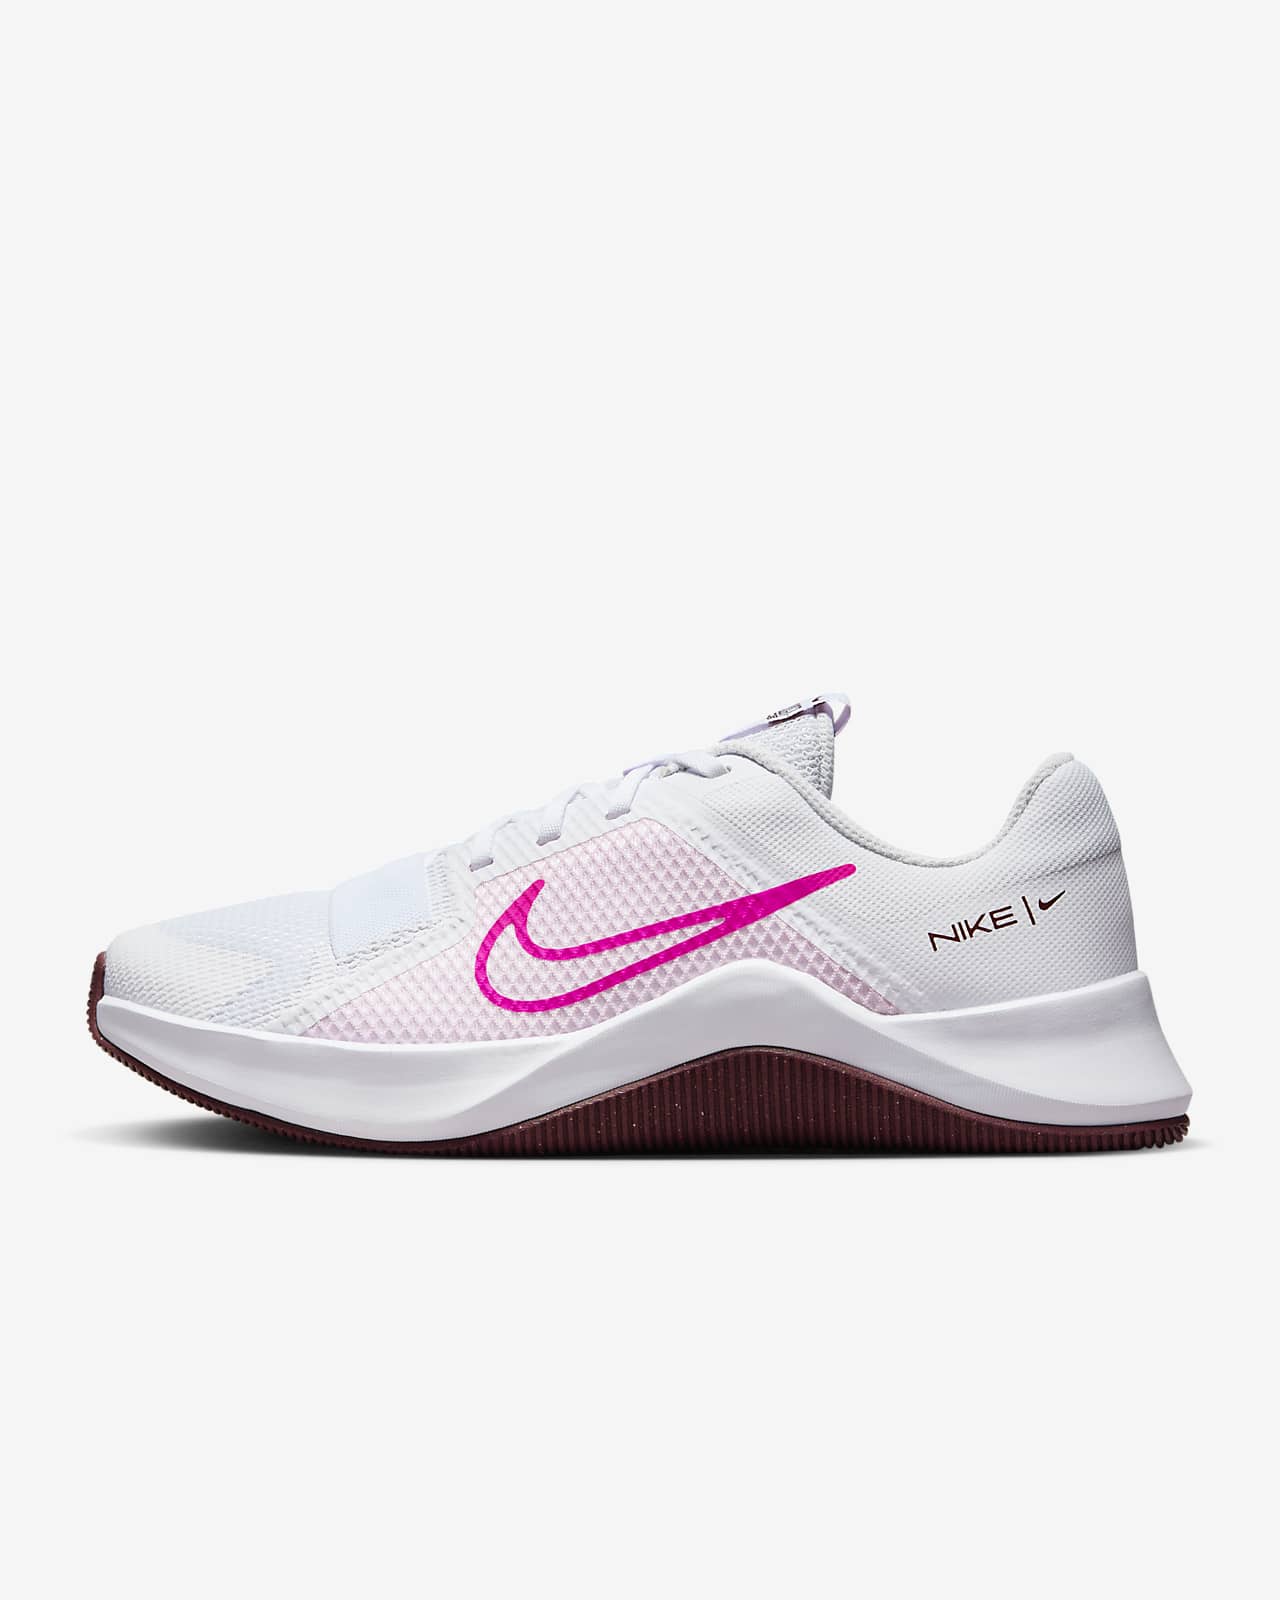 Nike MC Trainer 2 Women’s Workout Shoes